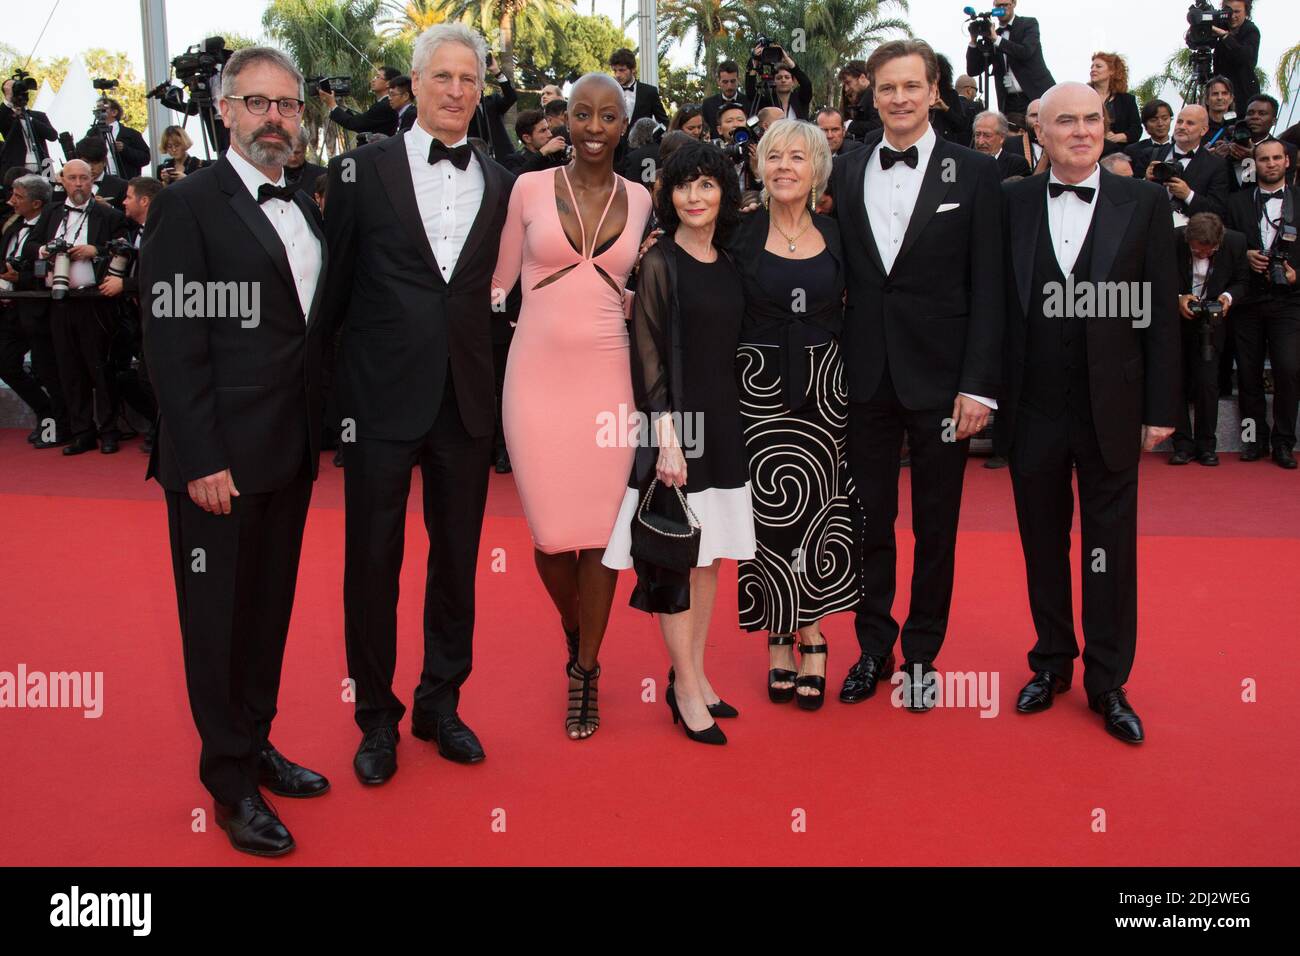 Ged Doherty, Colin Firth, producer Sarah Green, producer Peter Saraf, producers Nancy Buirski, Oge Egbuono and Marc Turtletaub - CANNES 2016 - MONTEE DES MARCHES DU FILM 'LOVING' Photo by Nasser Berzane/ABACAPRESS.COM Stock Photo